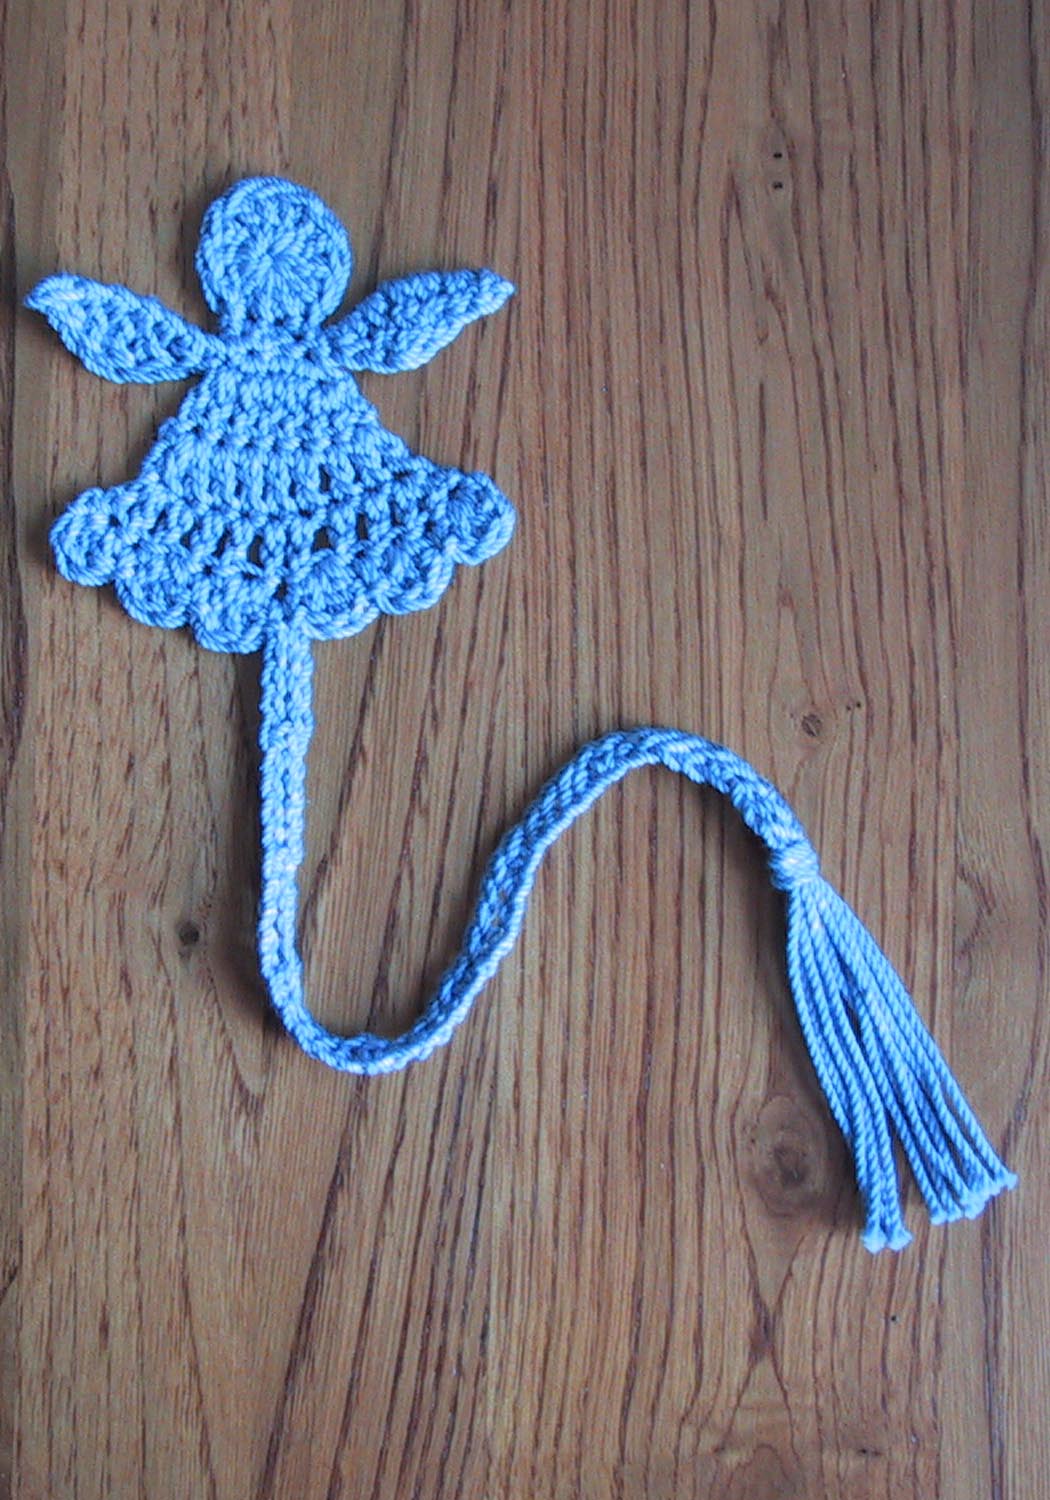 33 Crochet Bookmarks The Funky Stitch